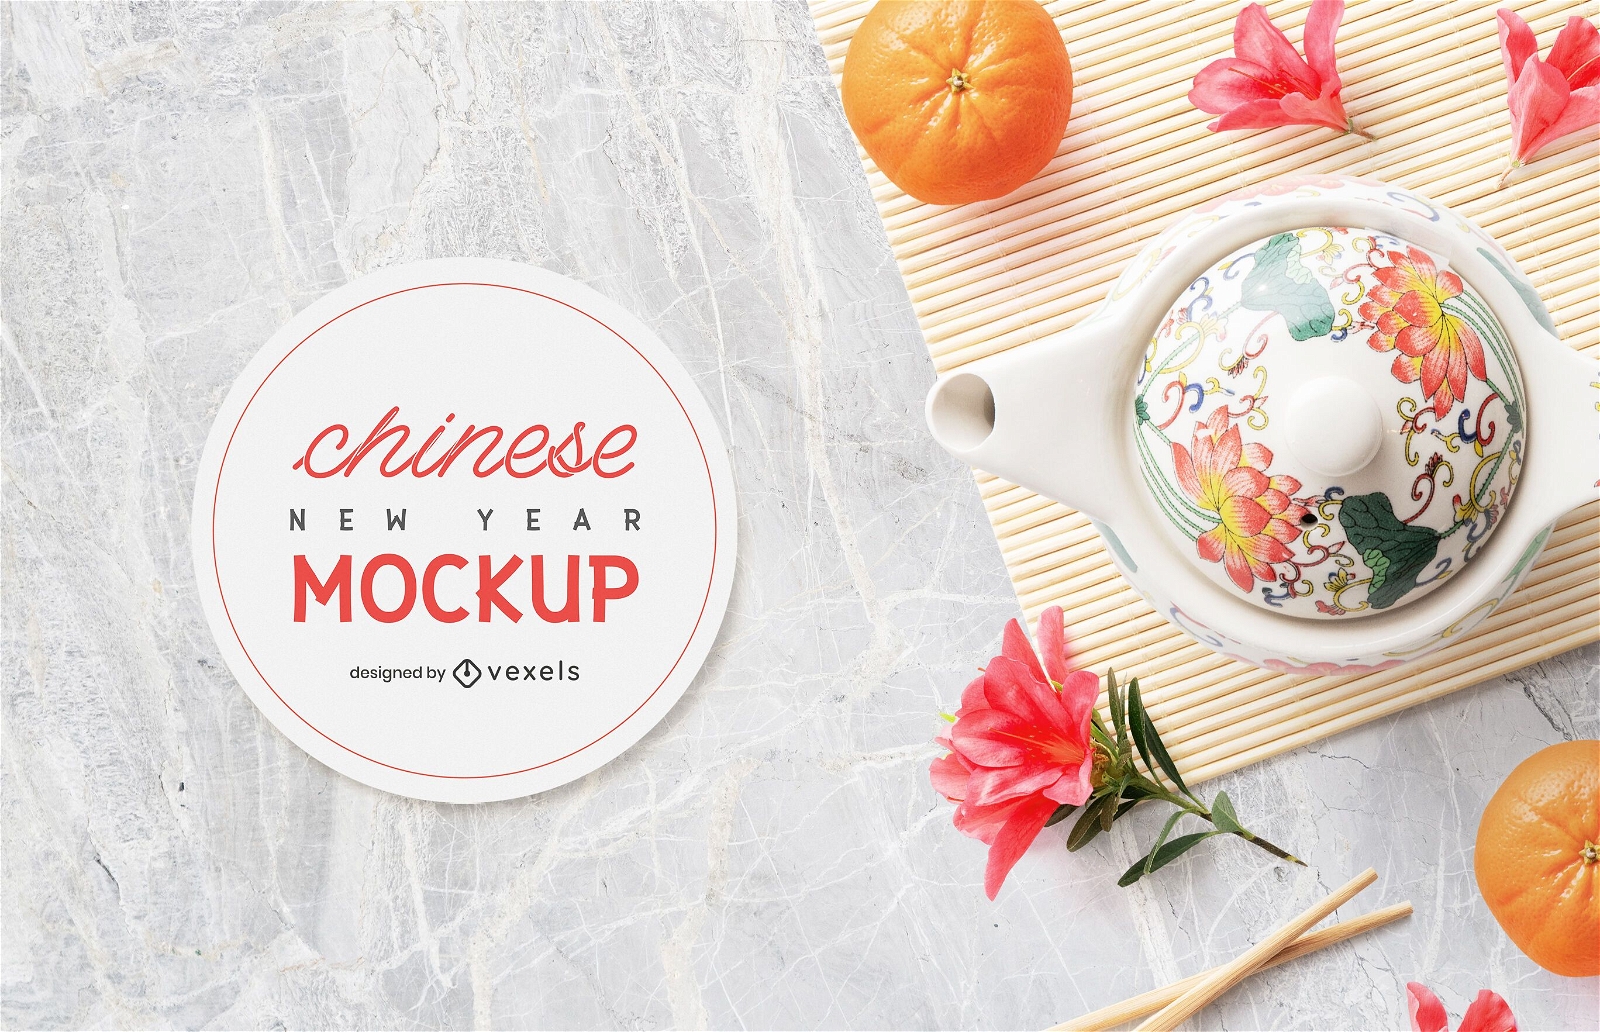 Chinese teapot mockup composition